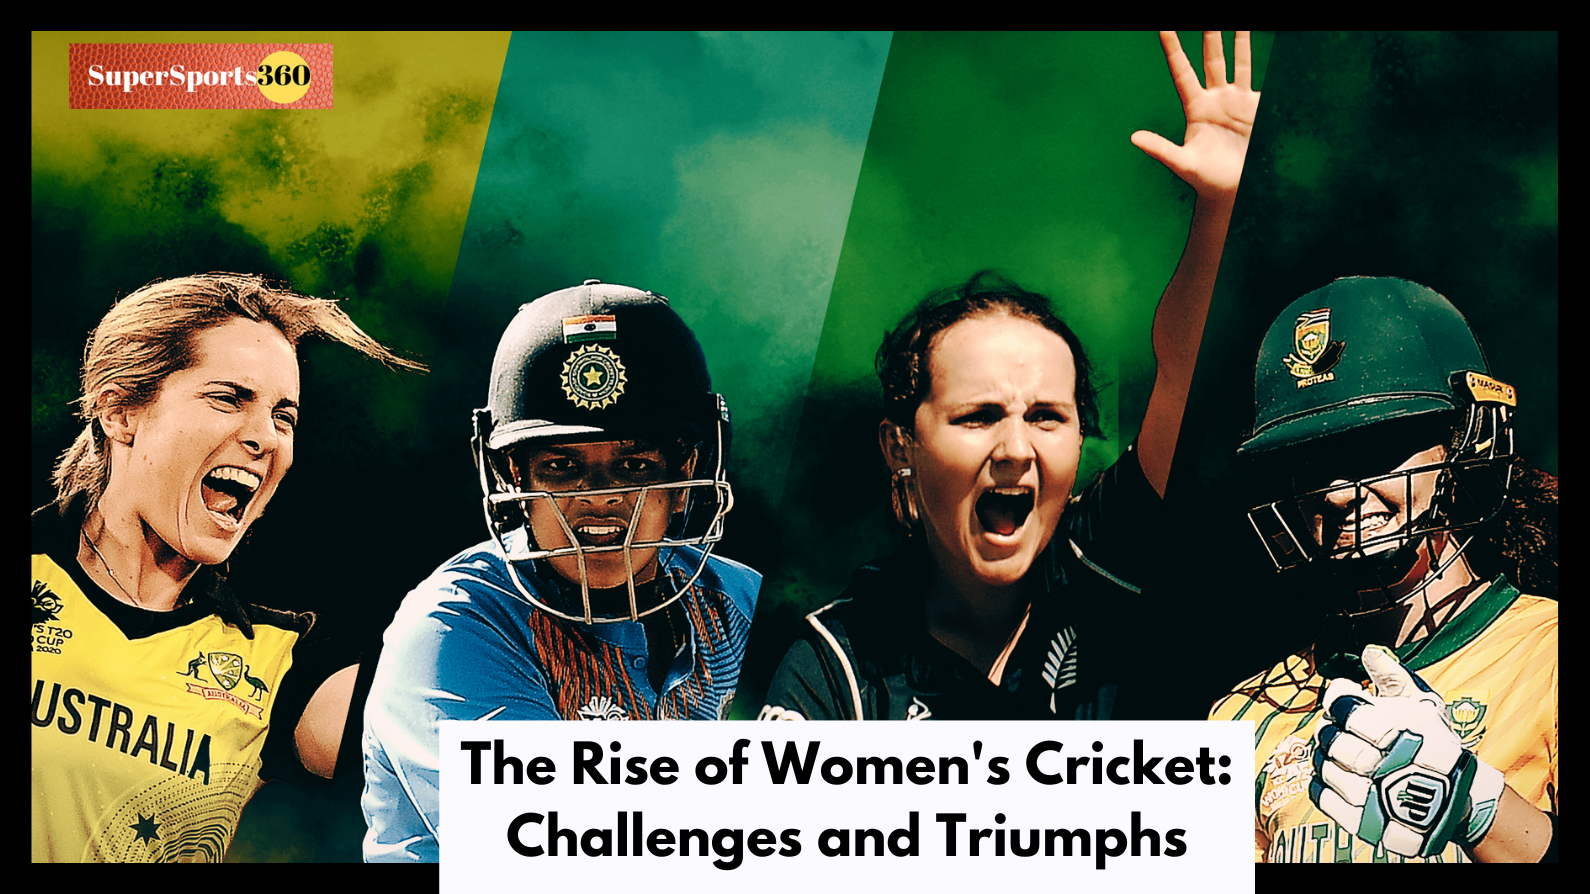 The Rise of Women's Cricket: Challenges and Triumphs